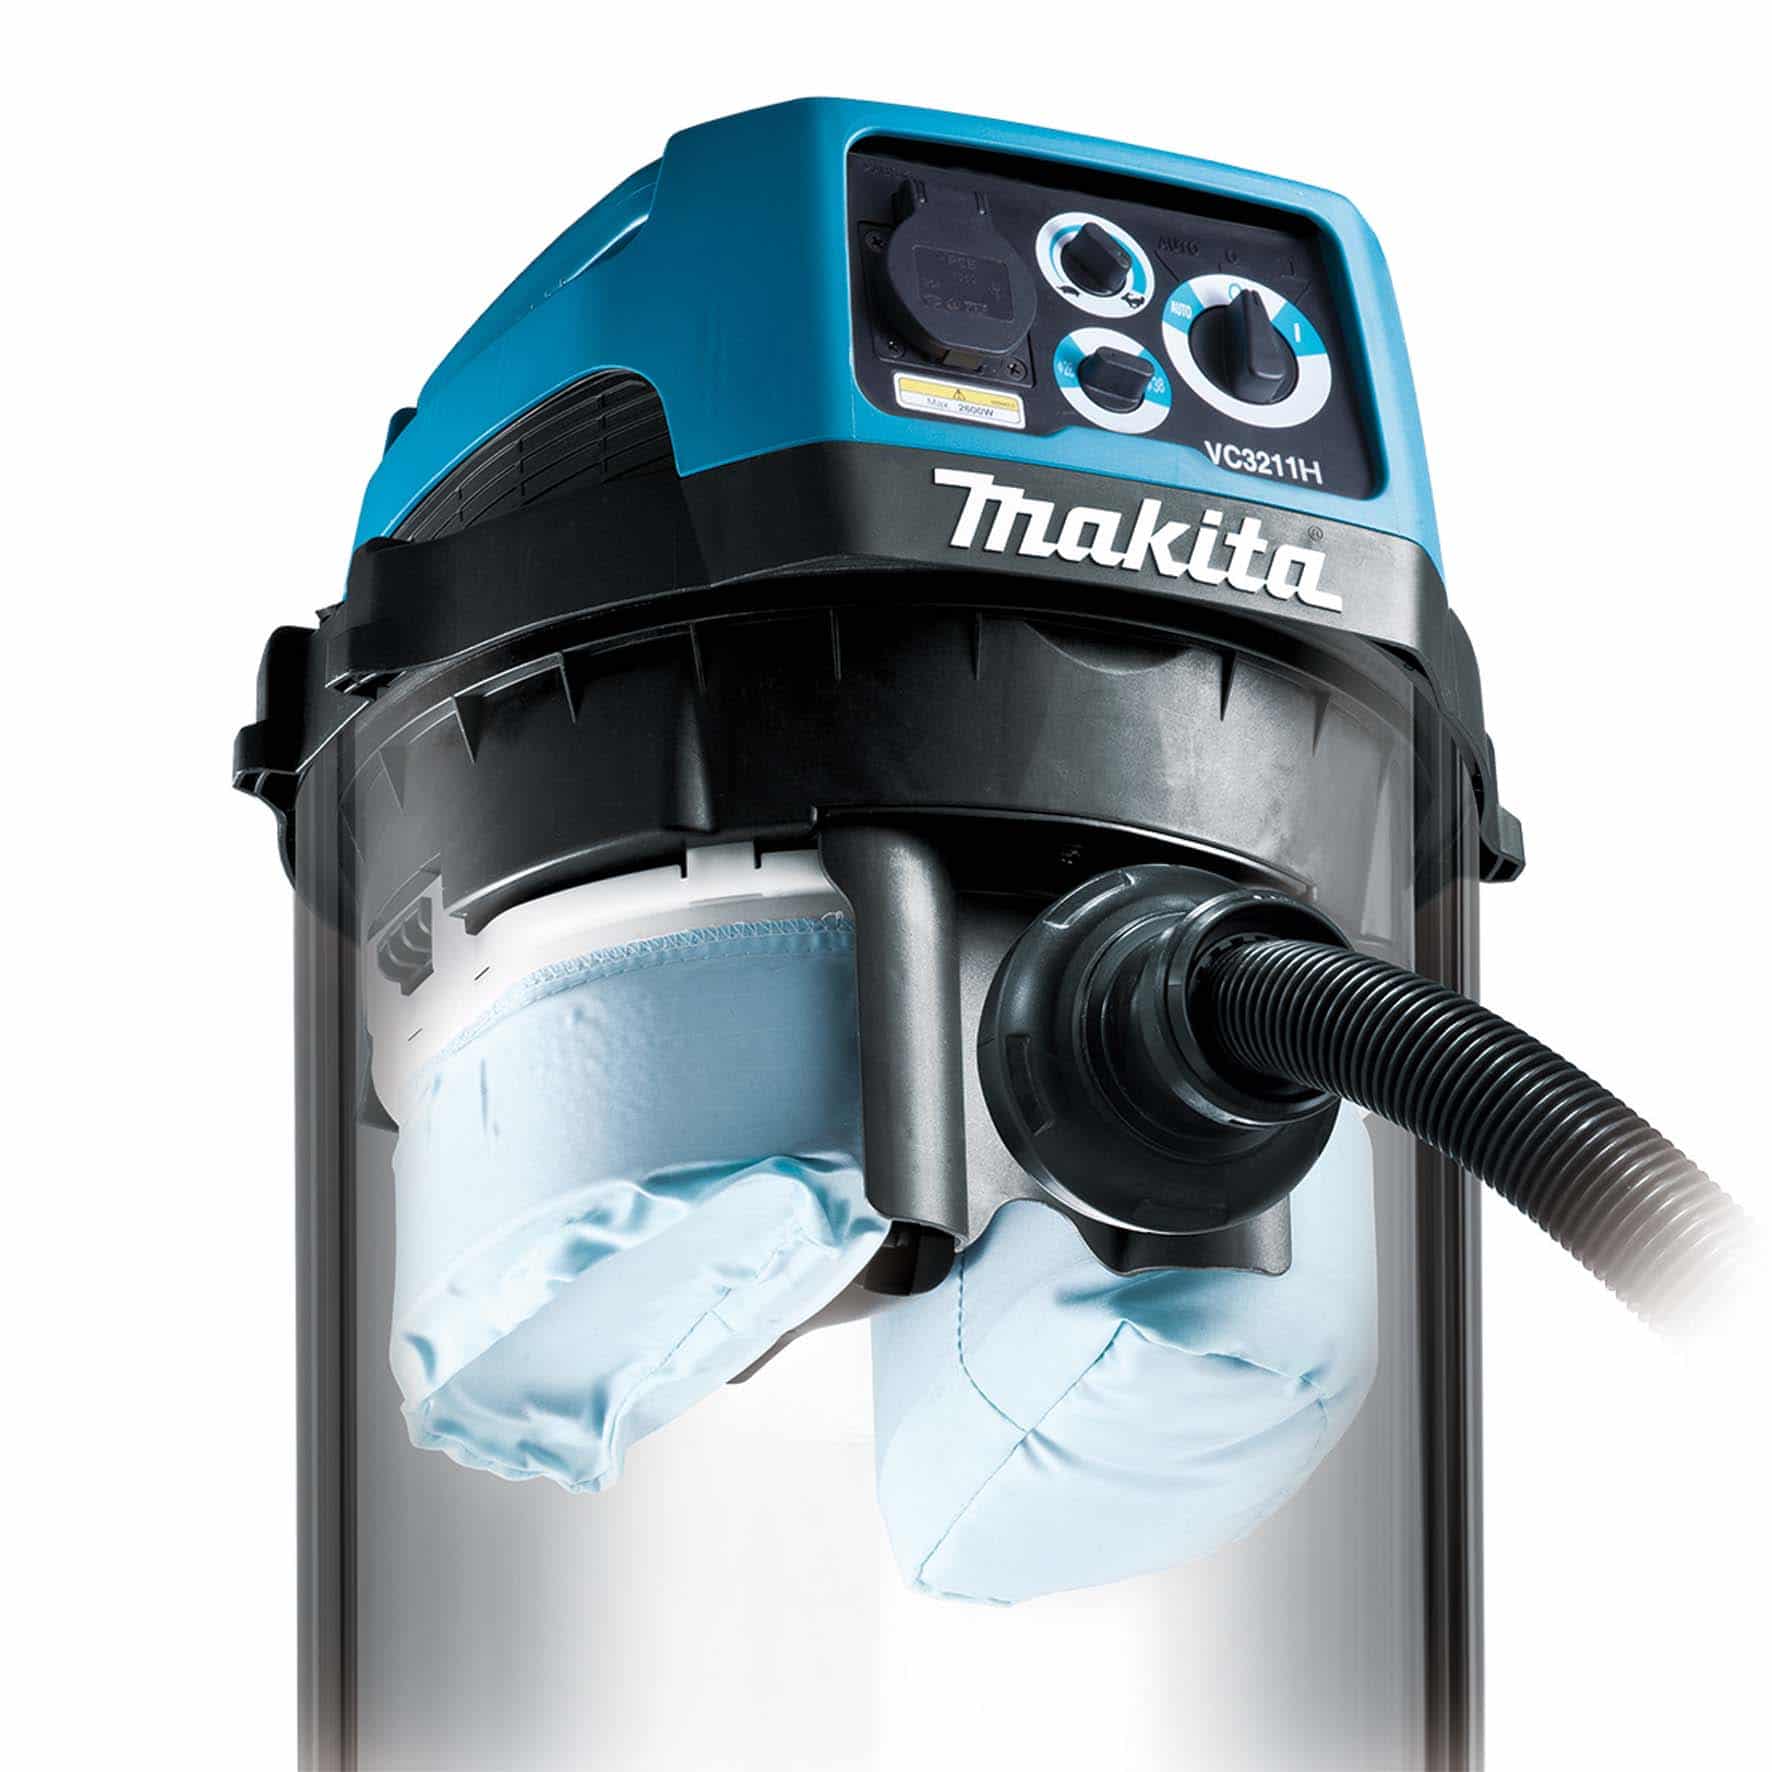 Makita launch H class approved dust extractor